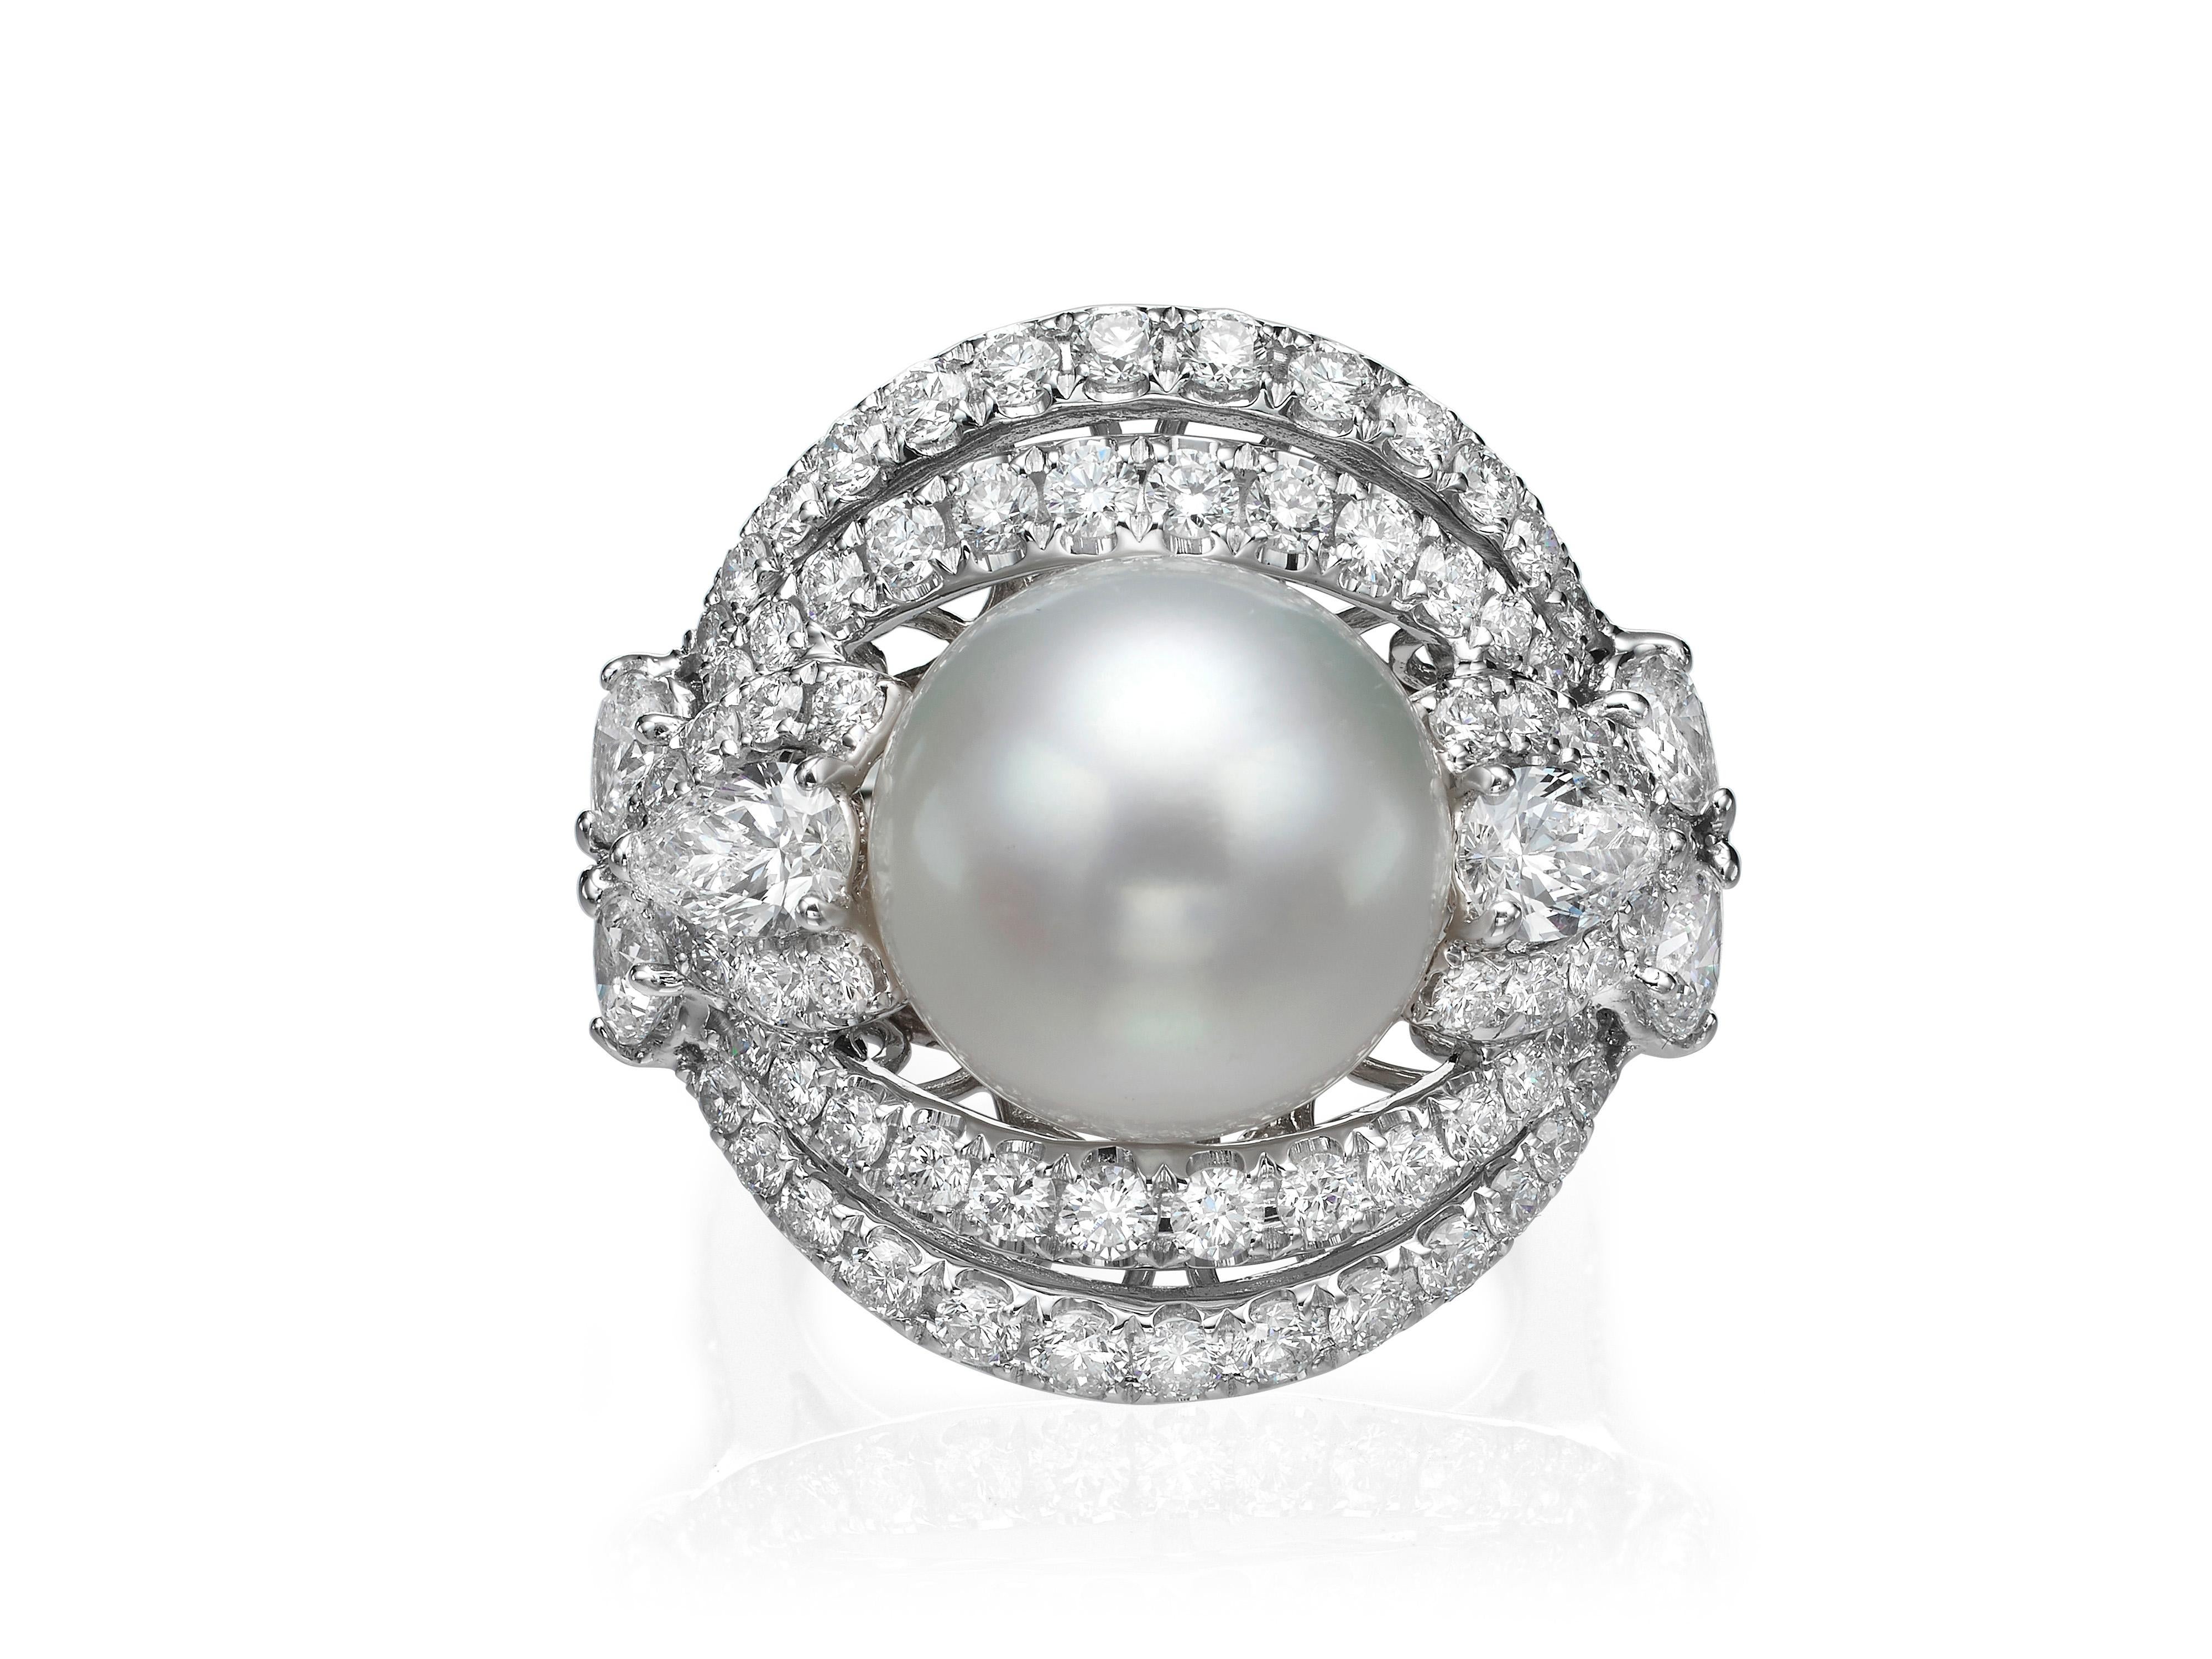 Contemporary 3.45 Carat Diamond and South Sea Pearl 18 Karat White Gold Cocktail Ring